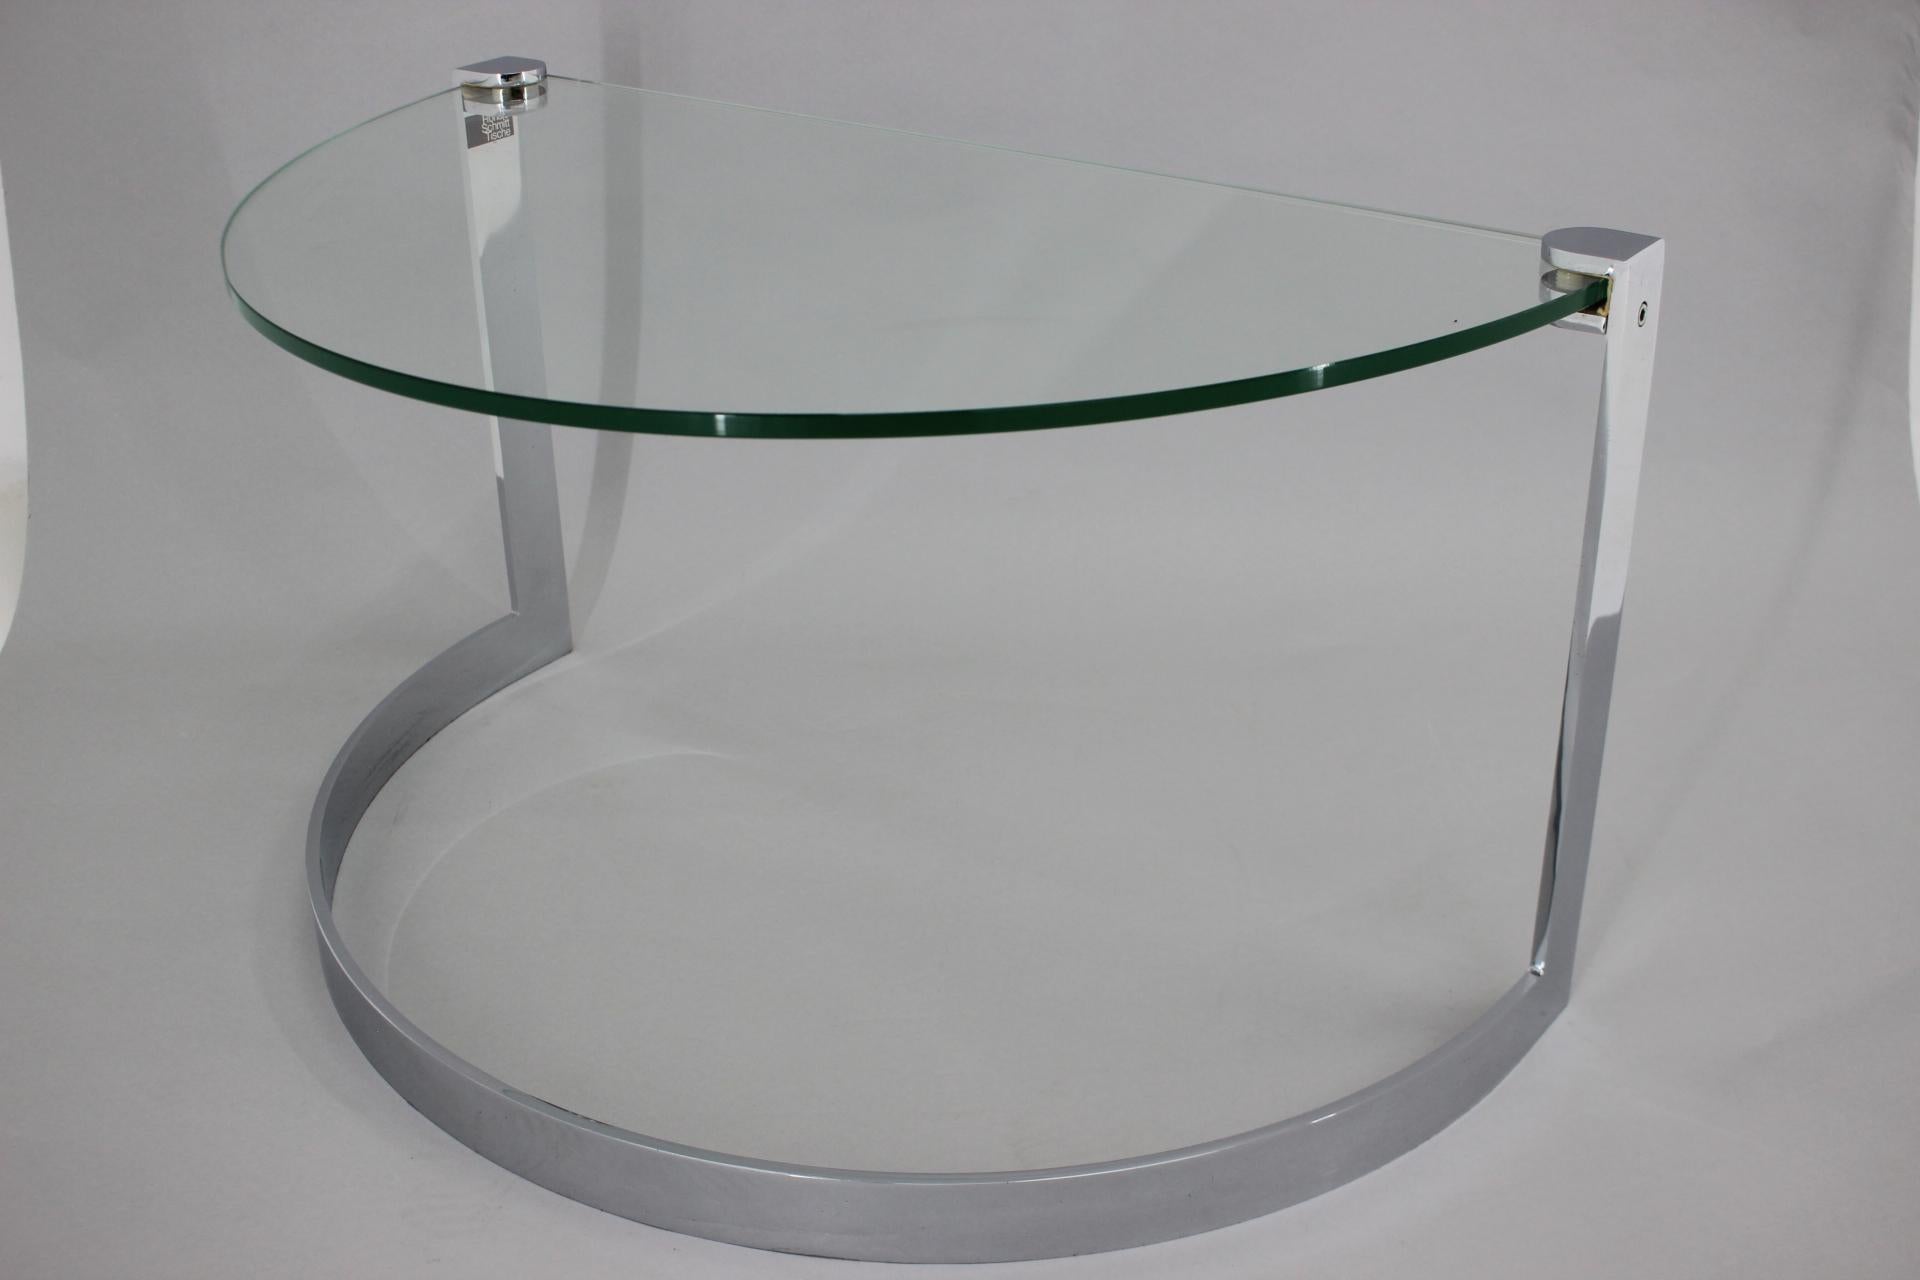 Late 20th Century 1980s Steel and Glass Side Table by Friedrich Moller for Ronald Schmitt Tische For Sale